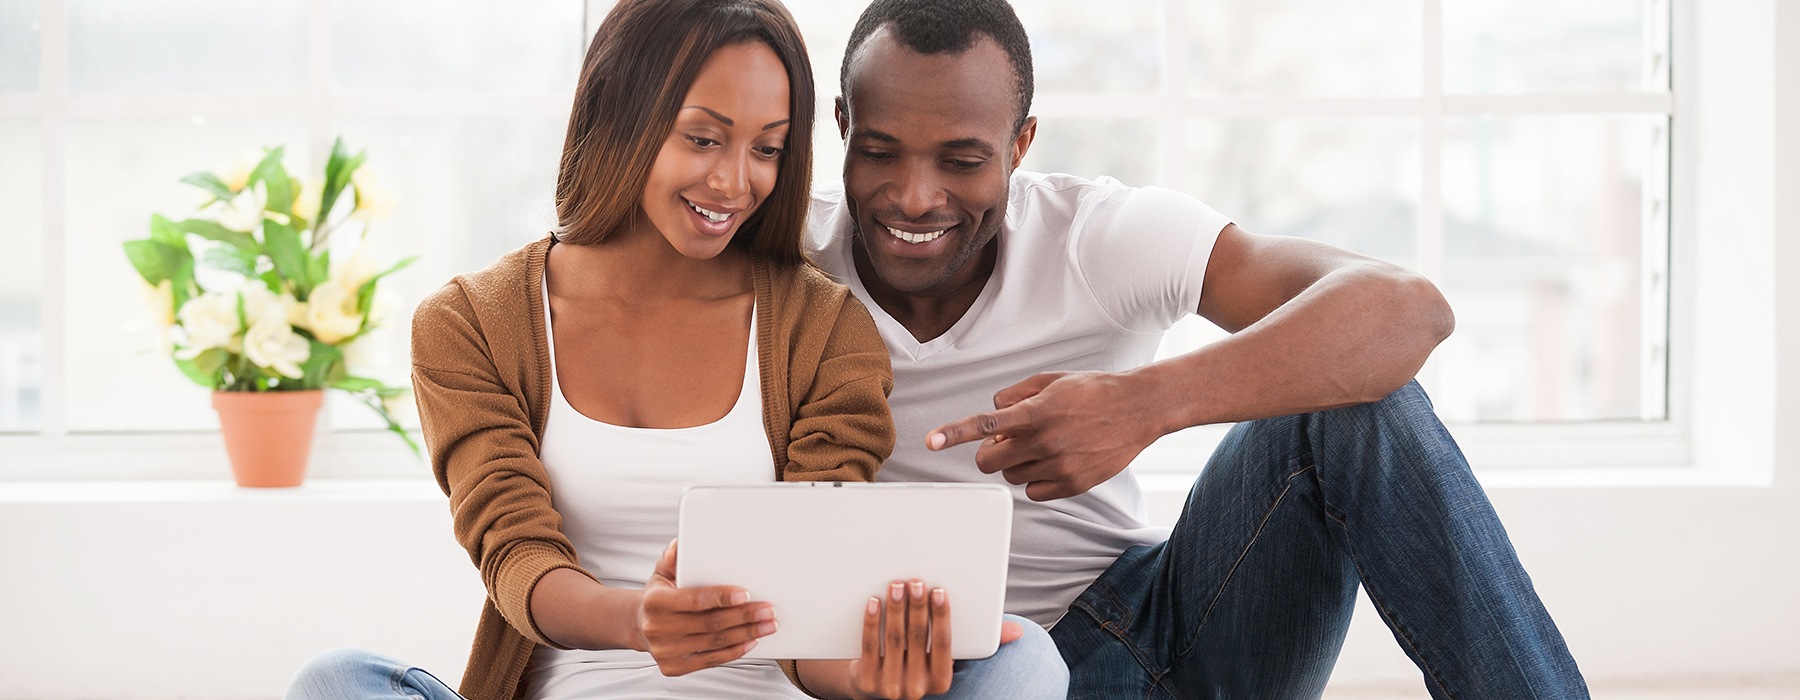 Couple smiling while looking at their IPAD